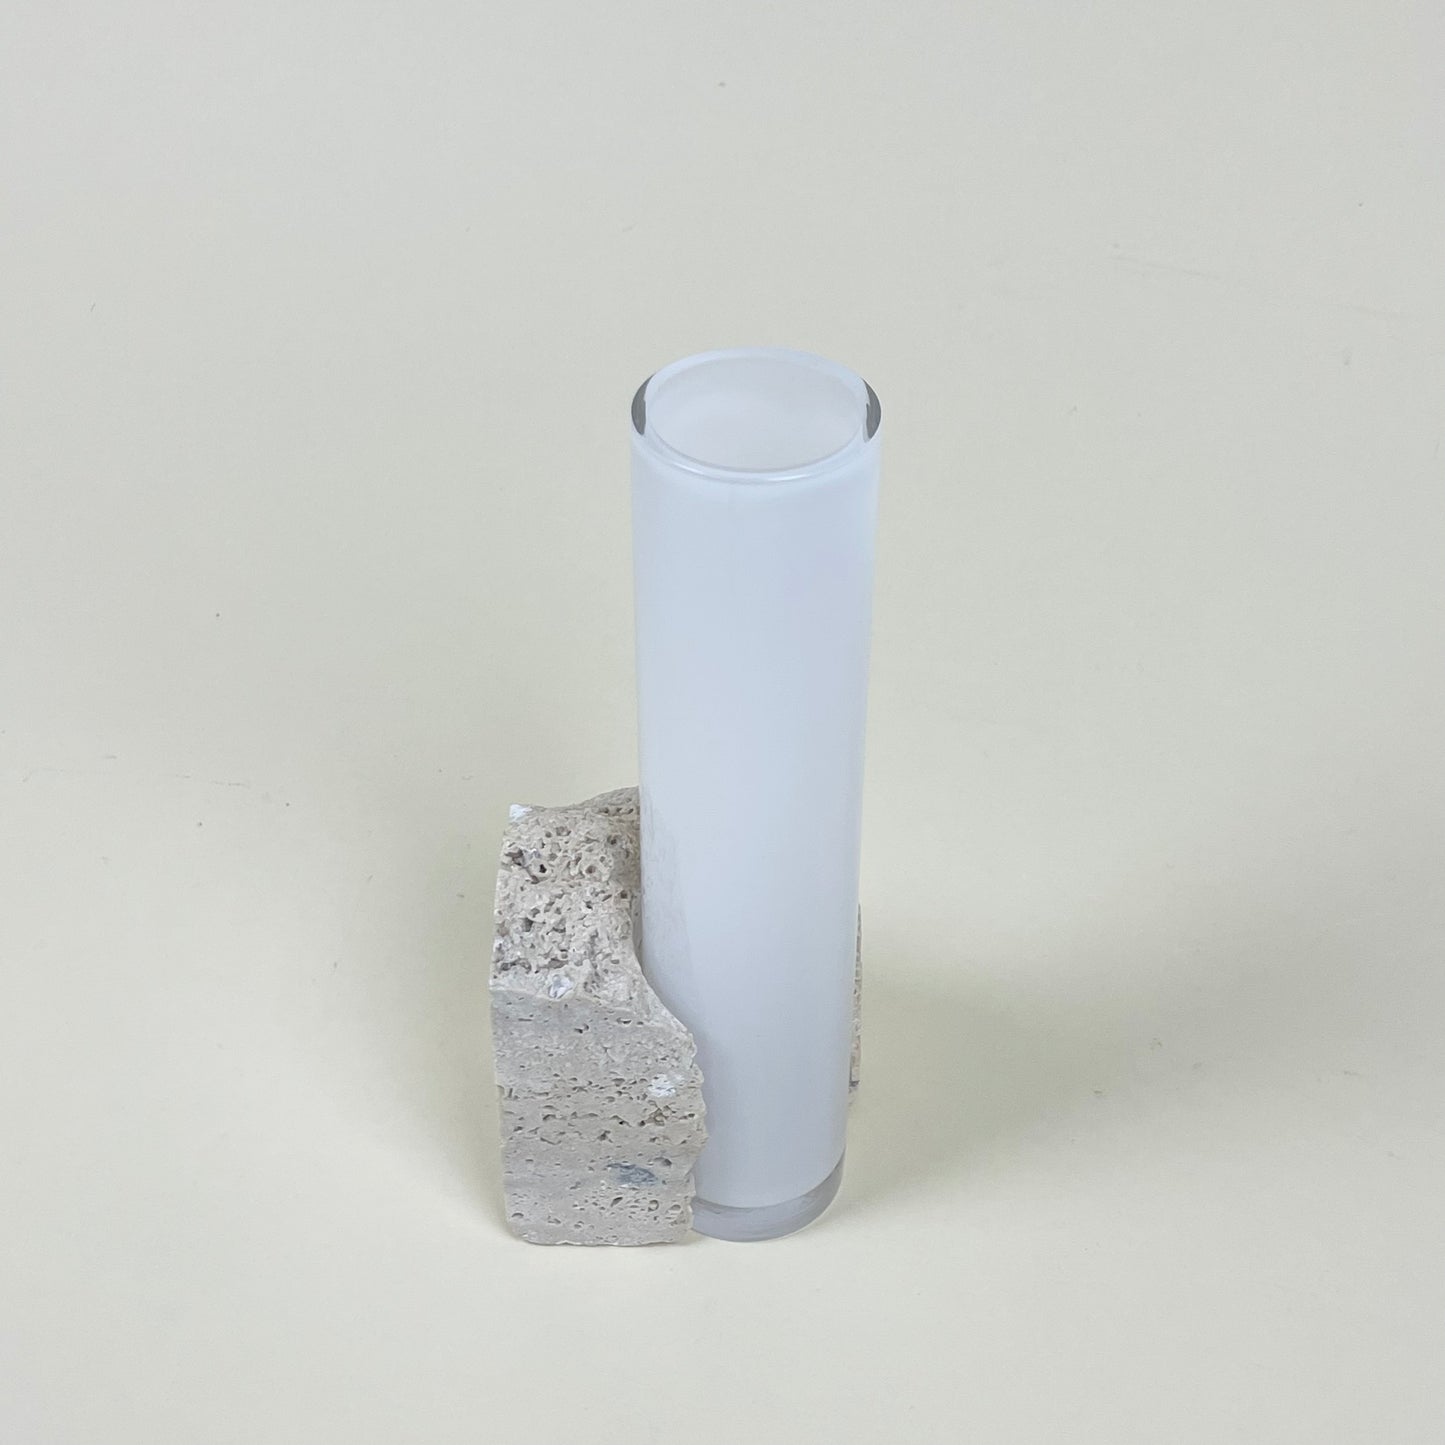 Marble and glass vase by Erik Olovsson